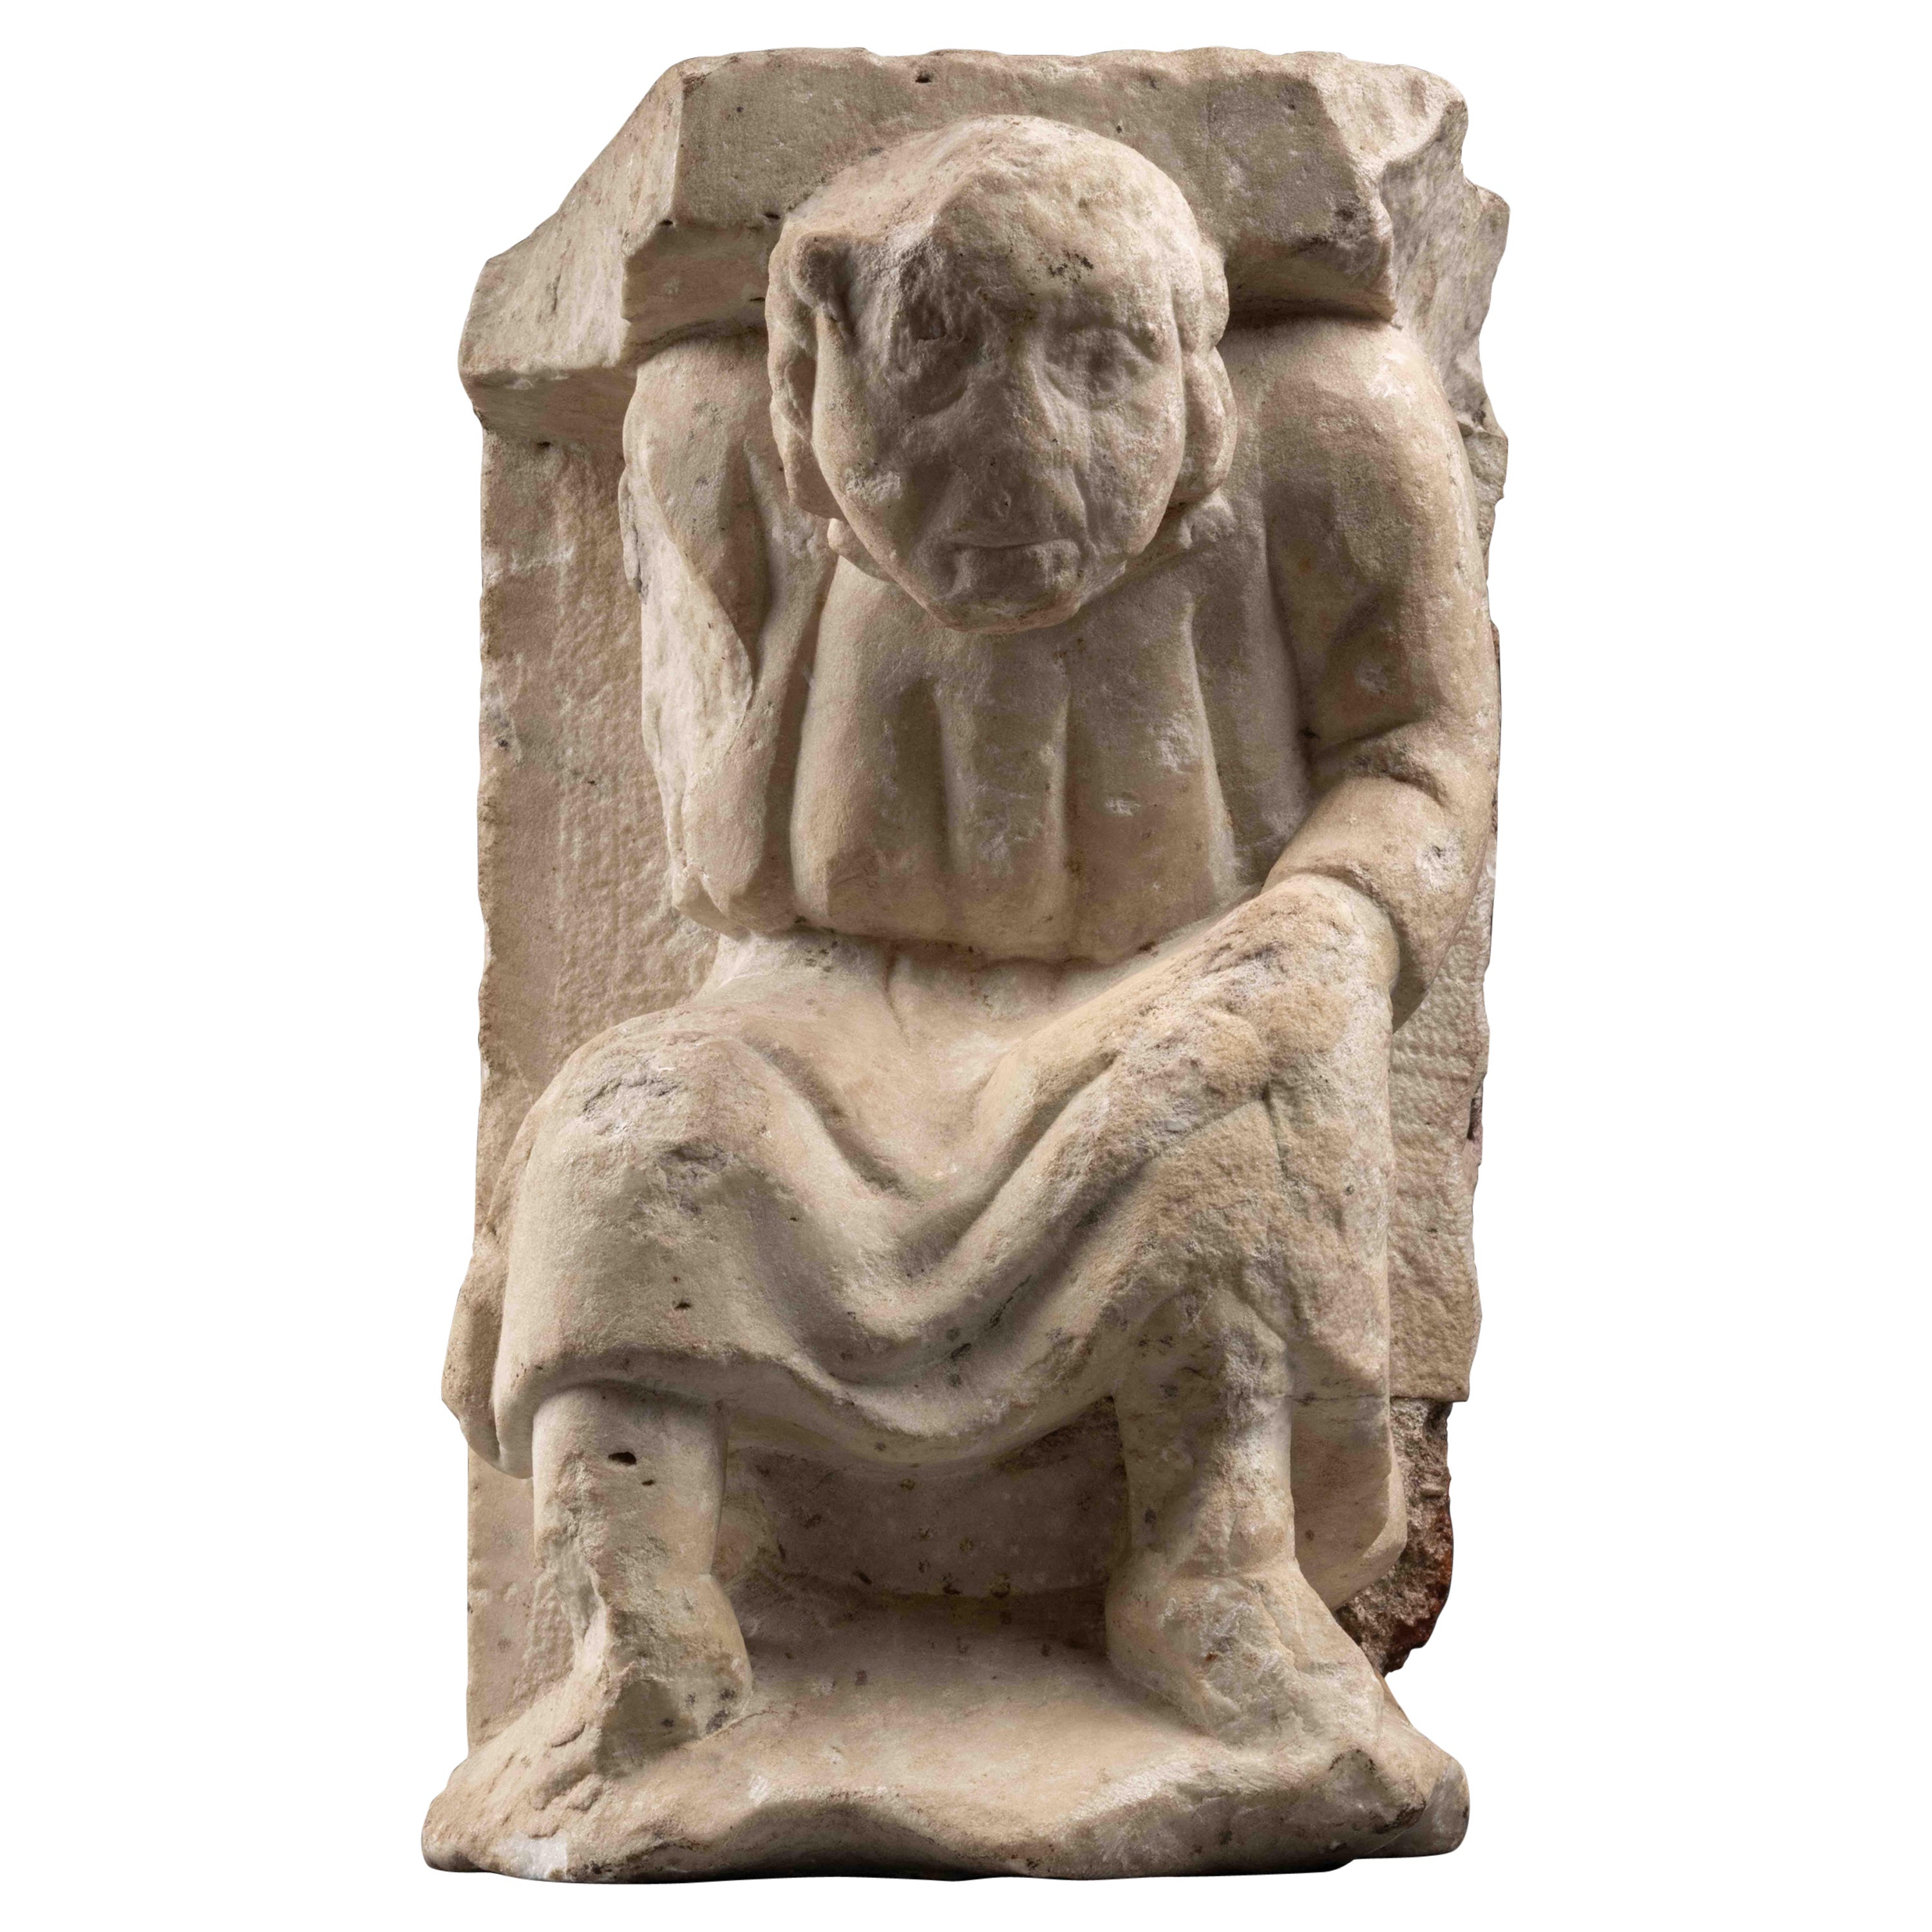 Telamon - Northern Italy, late 12th (Reemployed Roman marble)25000 For Sale